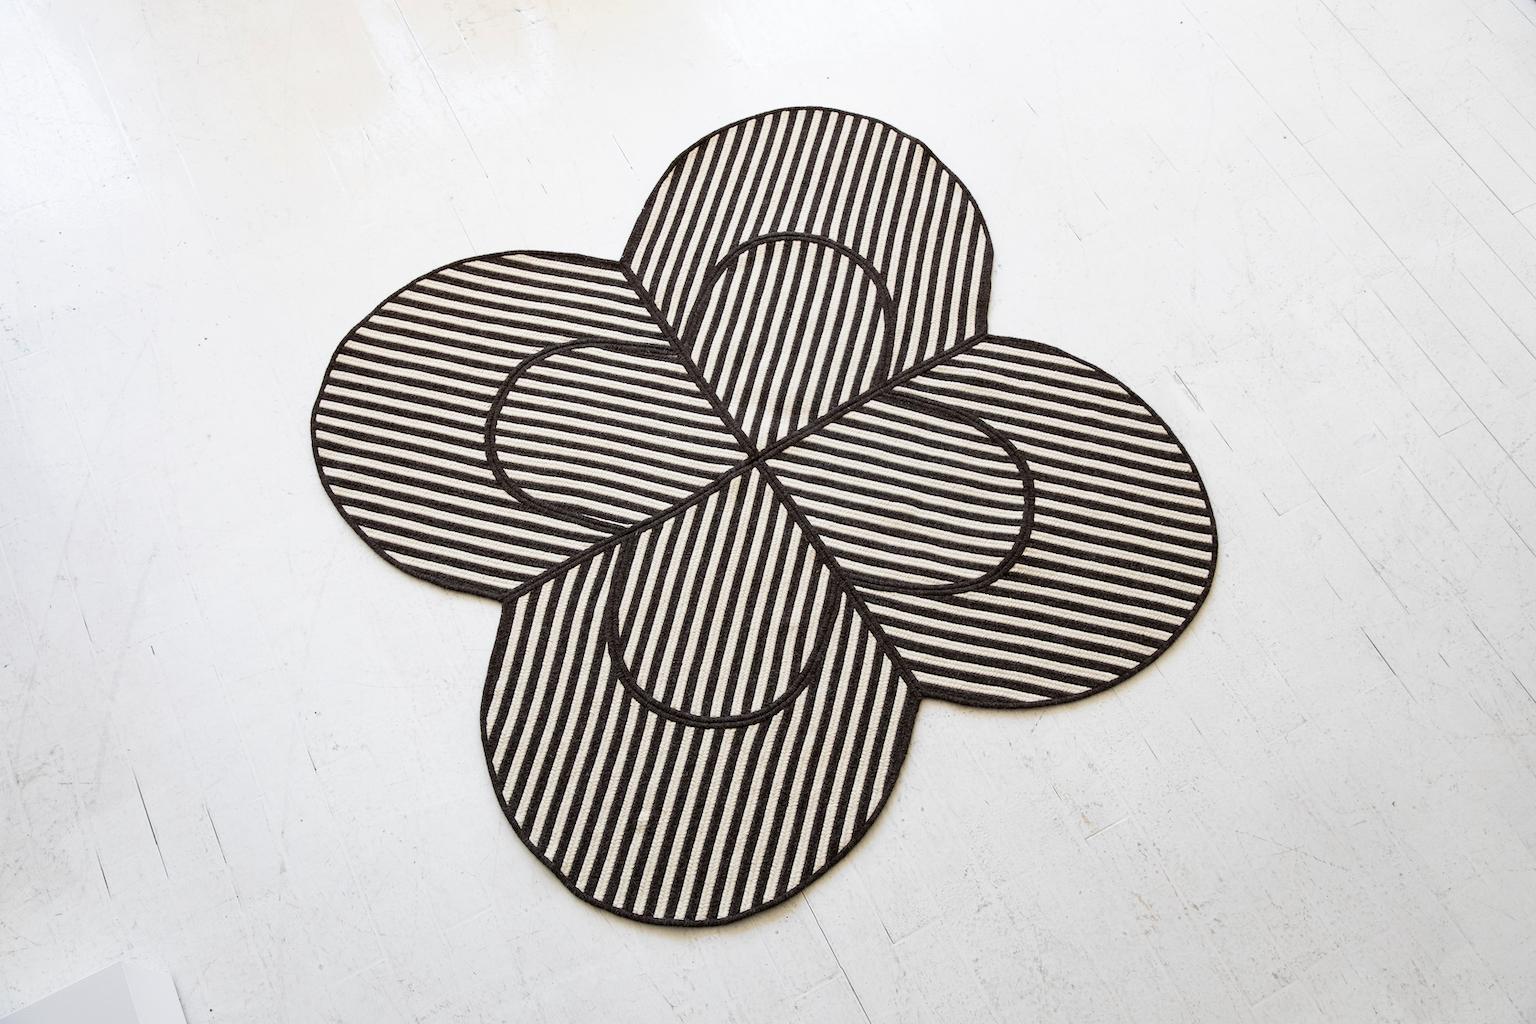 An iconic clover shape with a graphic composition of braided wool lines.

Handmade in New England by a mill with 30 years of manufacturing experience, each rug is braided and sewn to order using natural undyed Canadian wool.

Custom sizes,